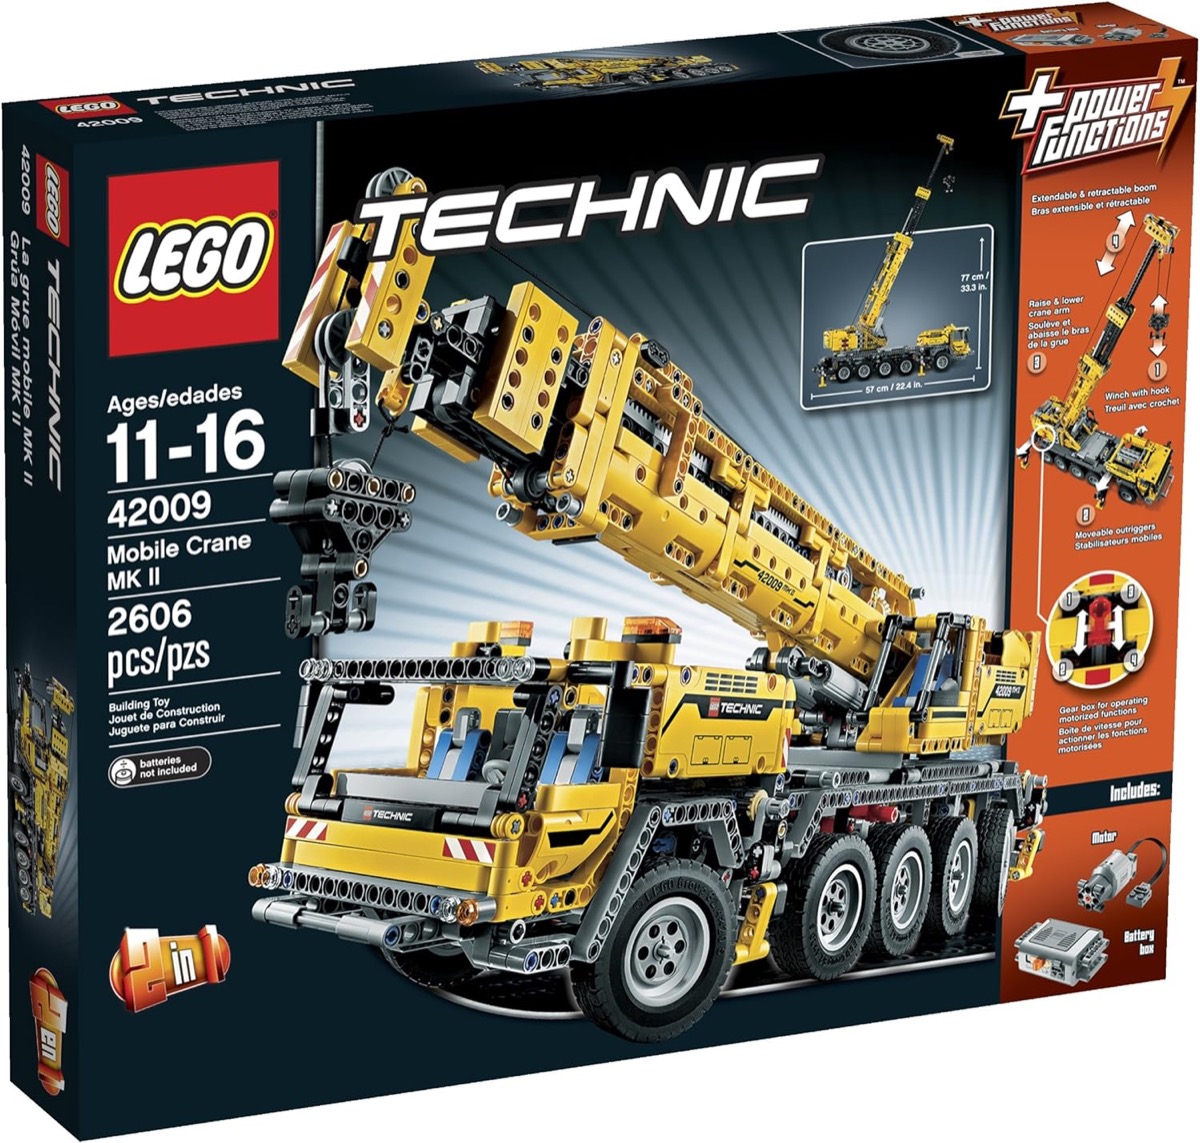 A box containing the Mobile Crane MK II model from LEGO